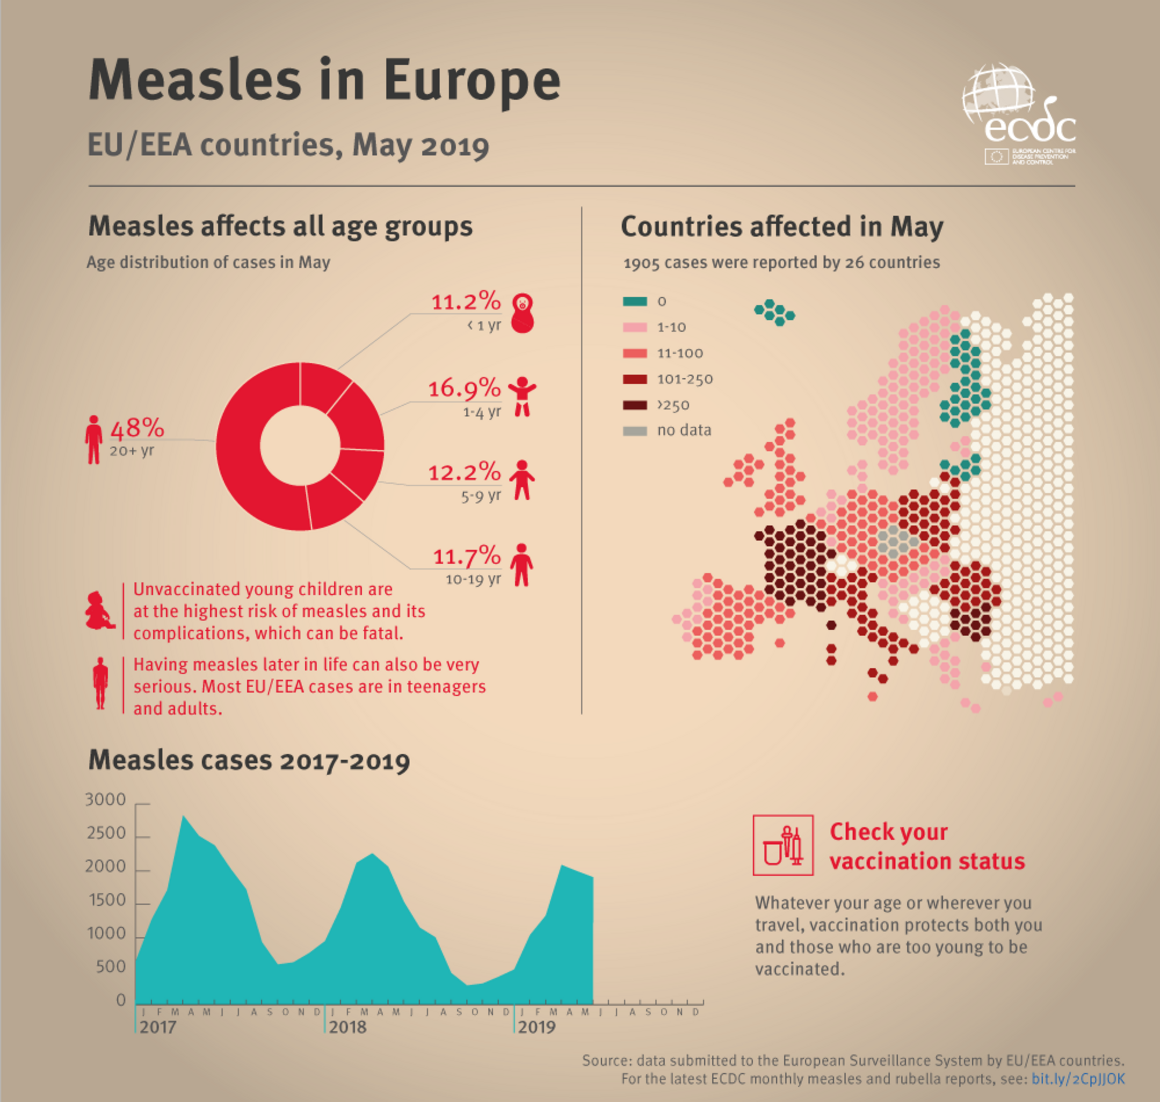 Infographic: Measles in Europe, July 2019